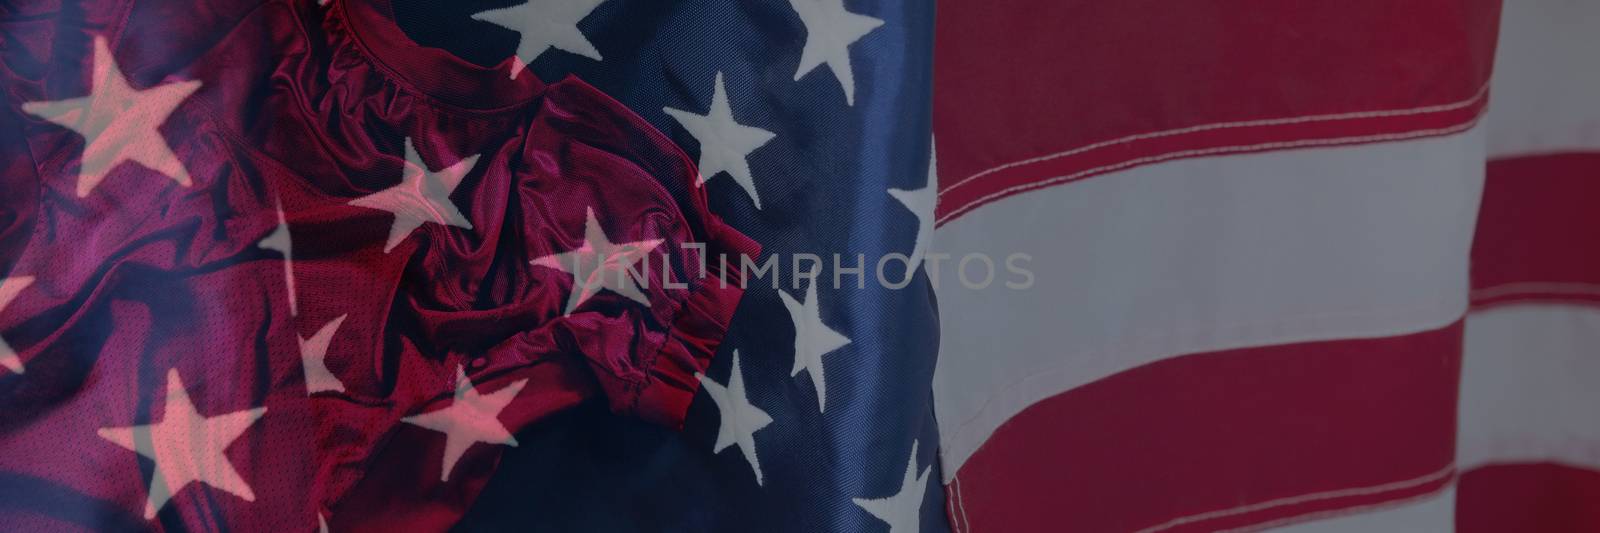 Close-up of an American flag against rugby jersey against black background